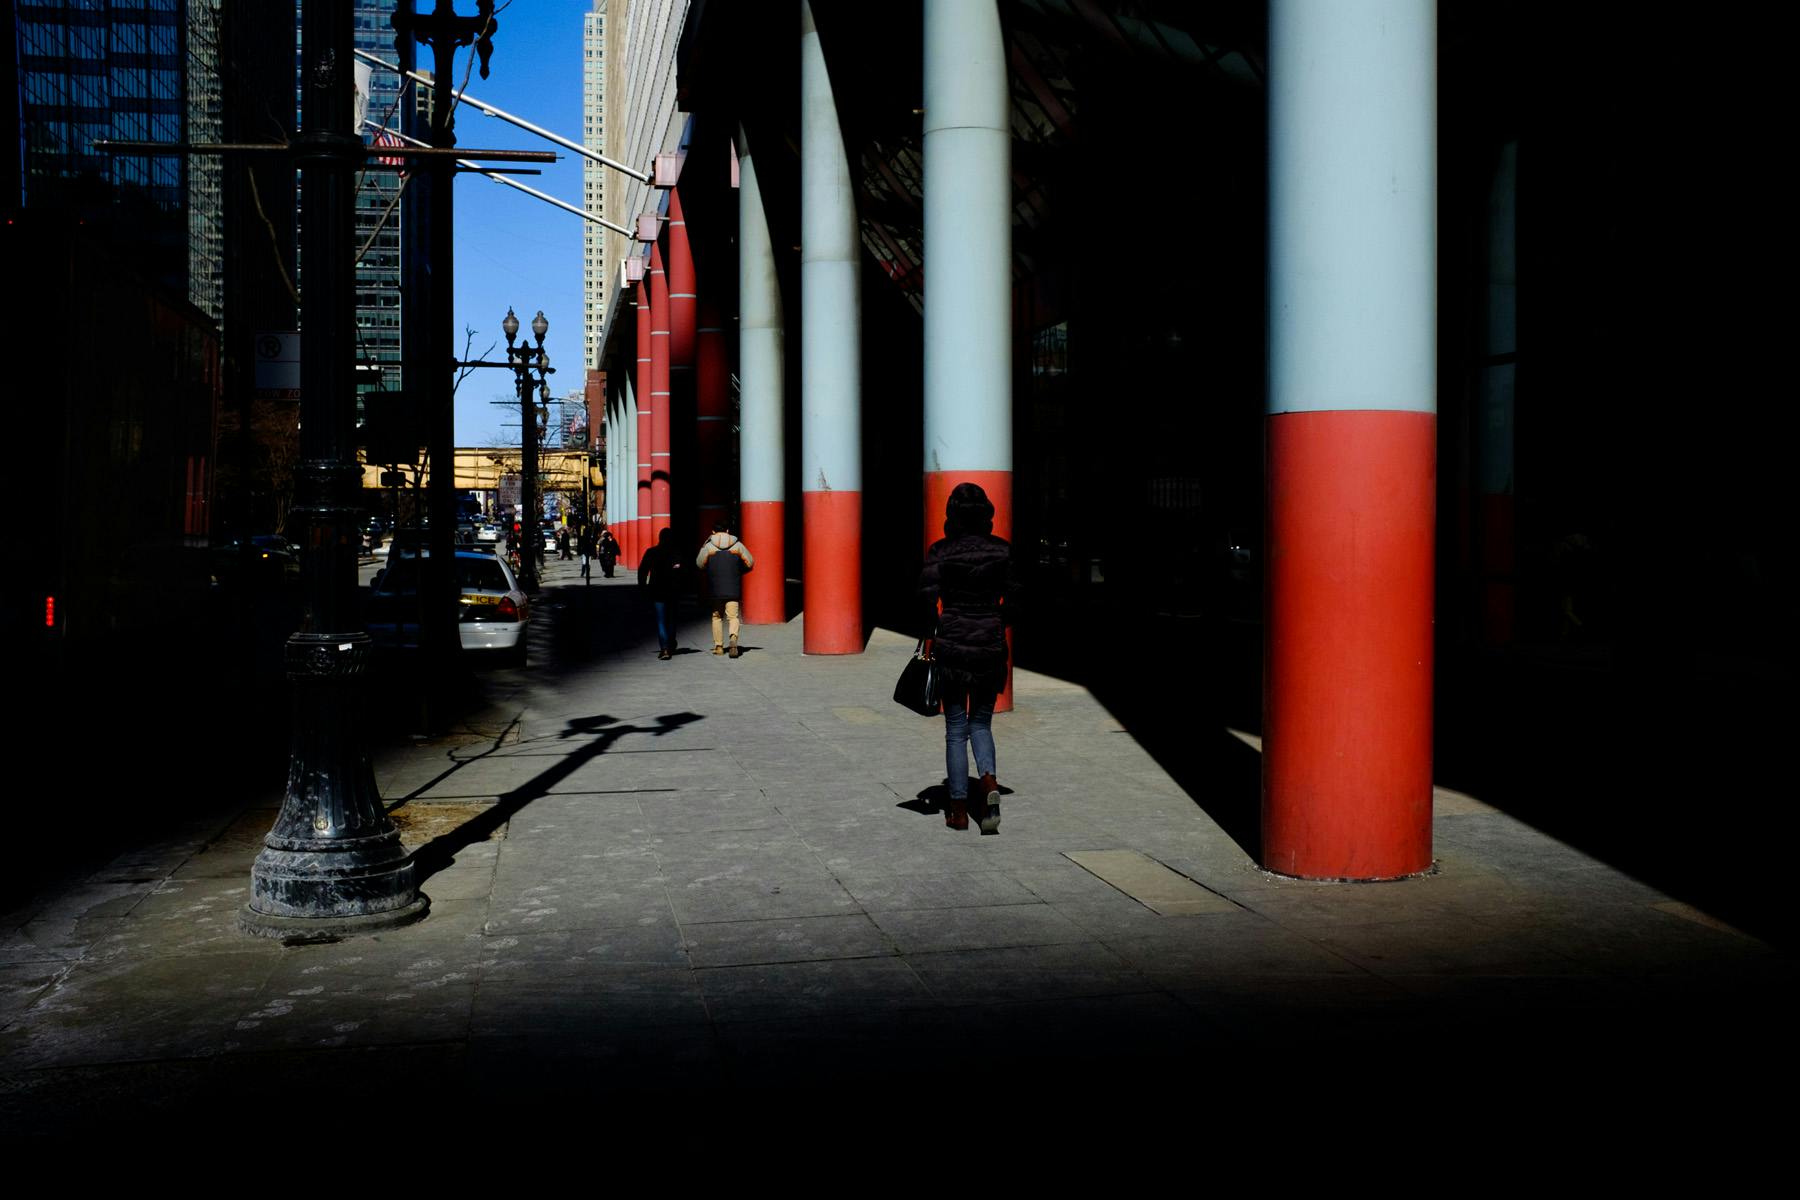 woman standing near the blue and red pillars of the Thompson Center surrounded by deep shadows.